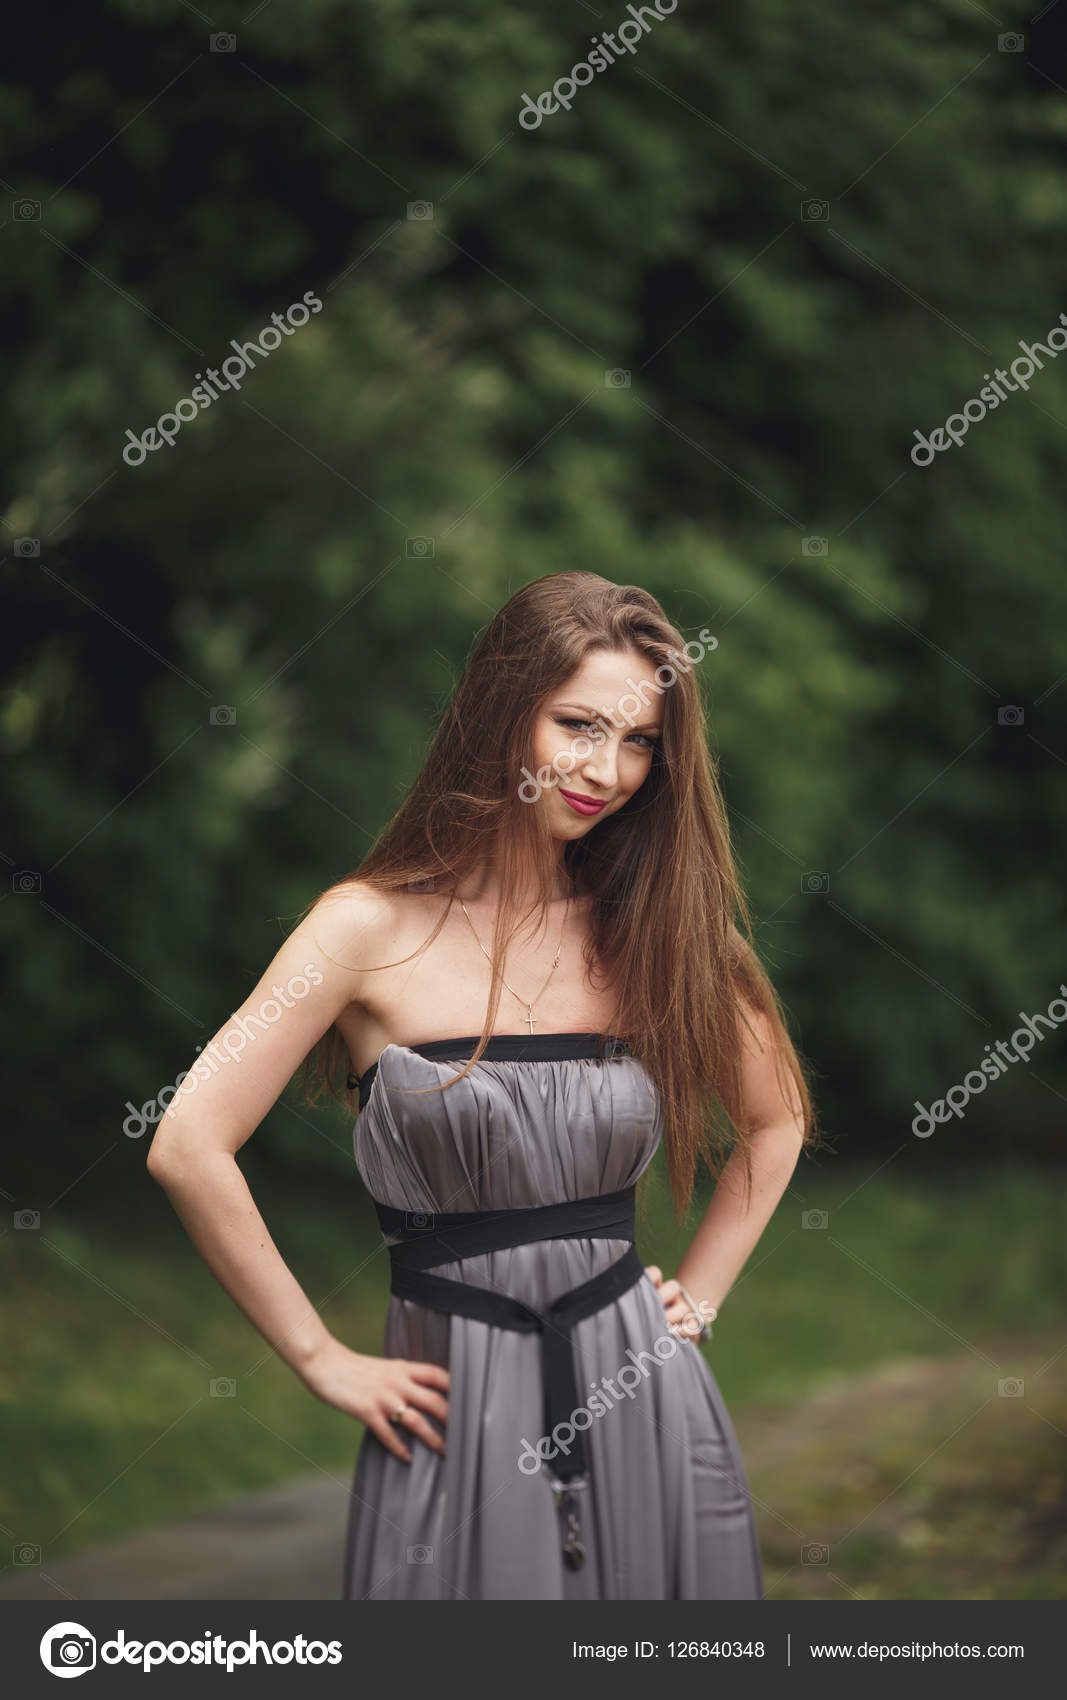 Beauty Romantic Girl Outdoors. Teenage Model with Casual Dress in park.  Blowing Long Hair. Stock Photo by © 126840348